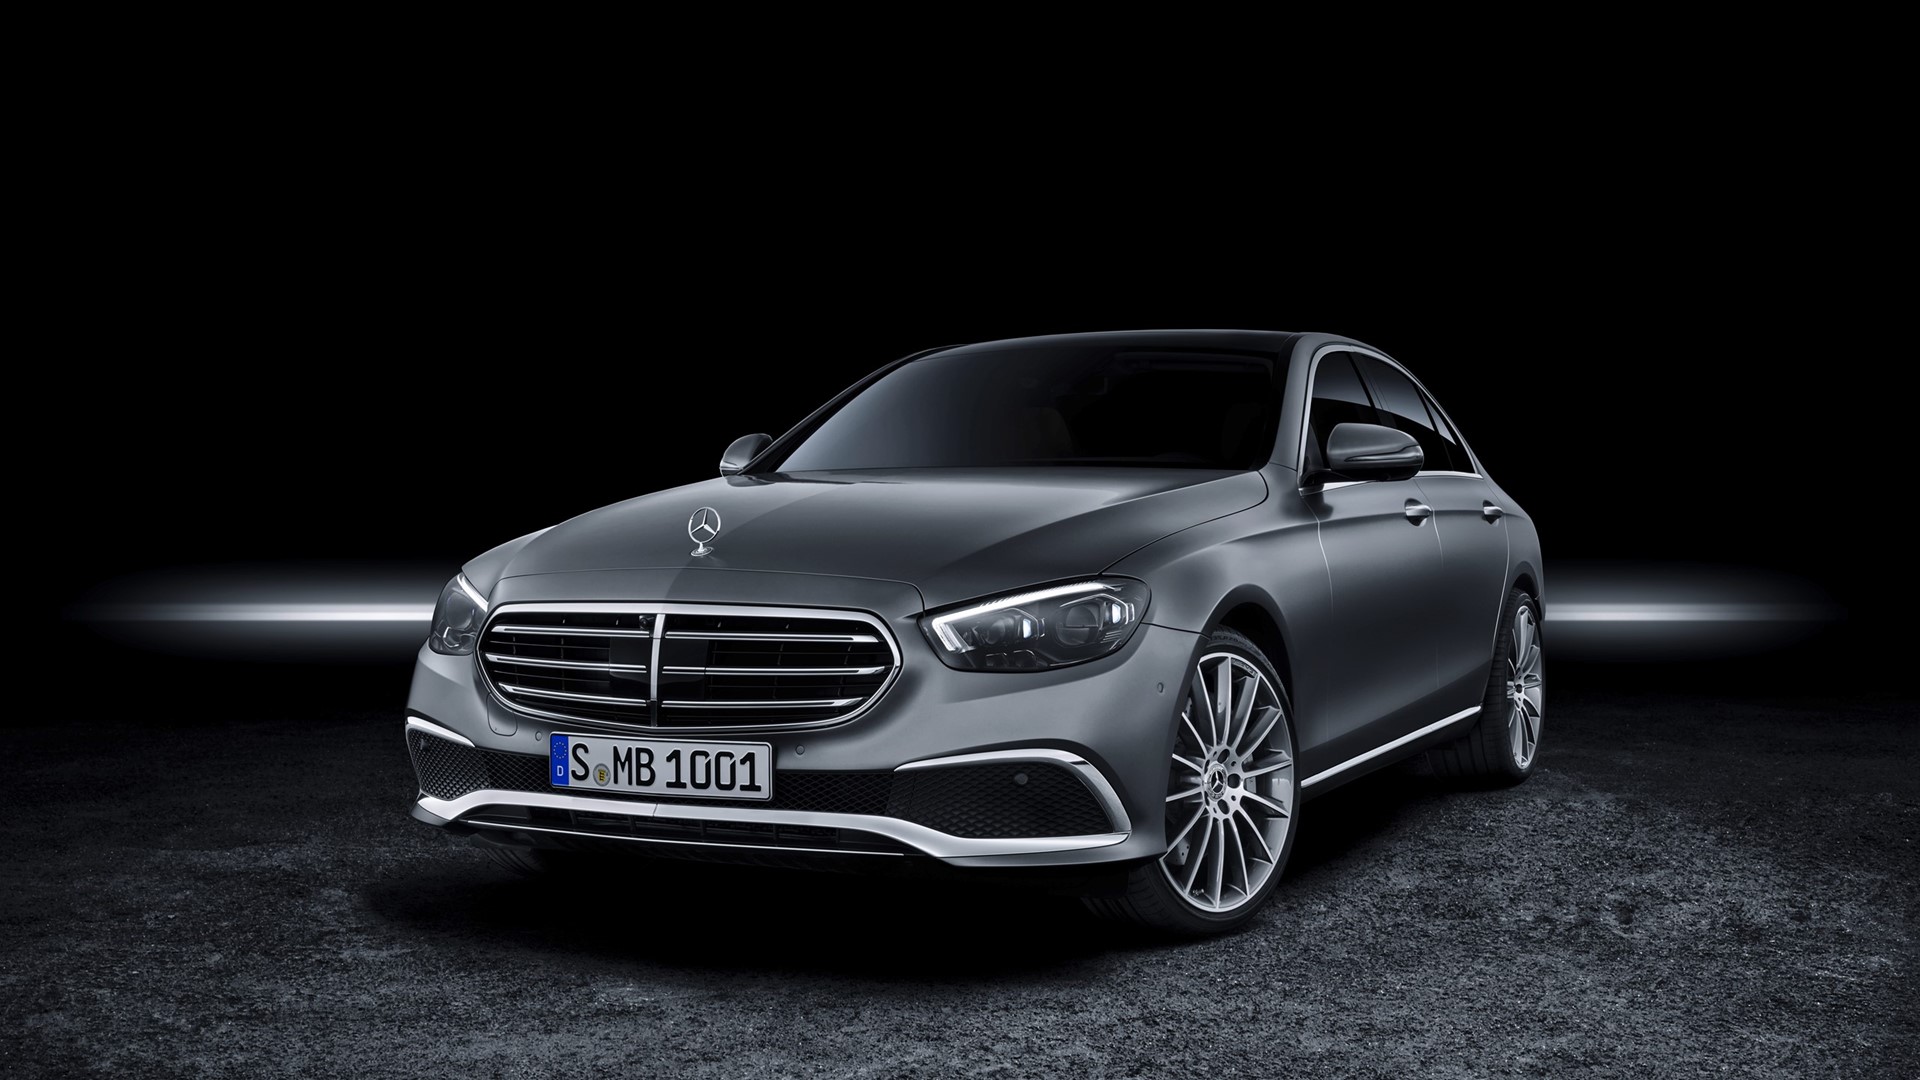 The New E Class Intelligence Is Getting Exciting